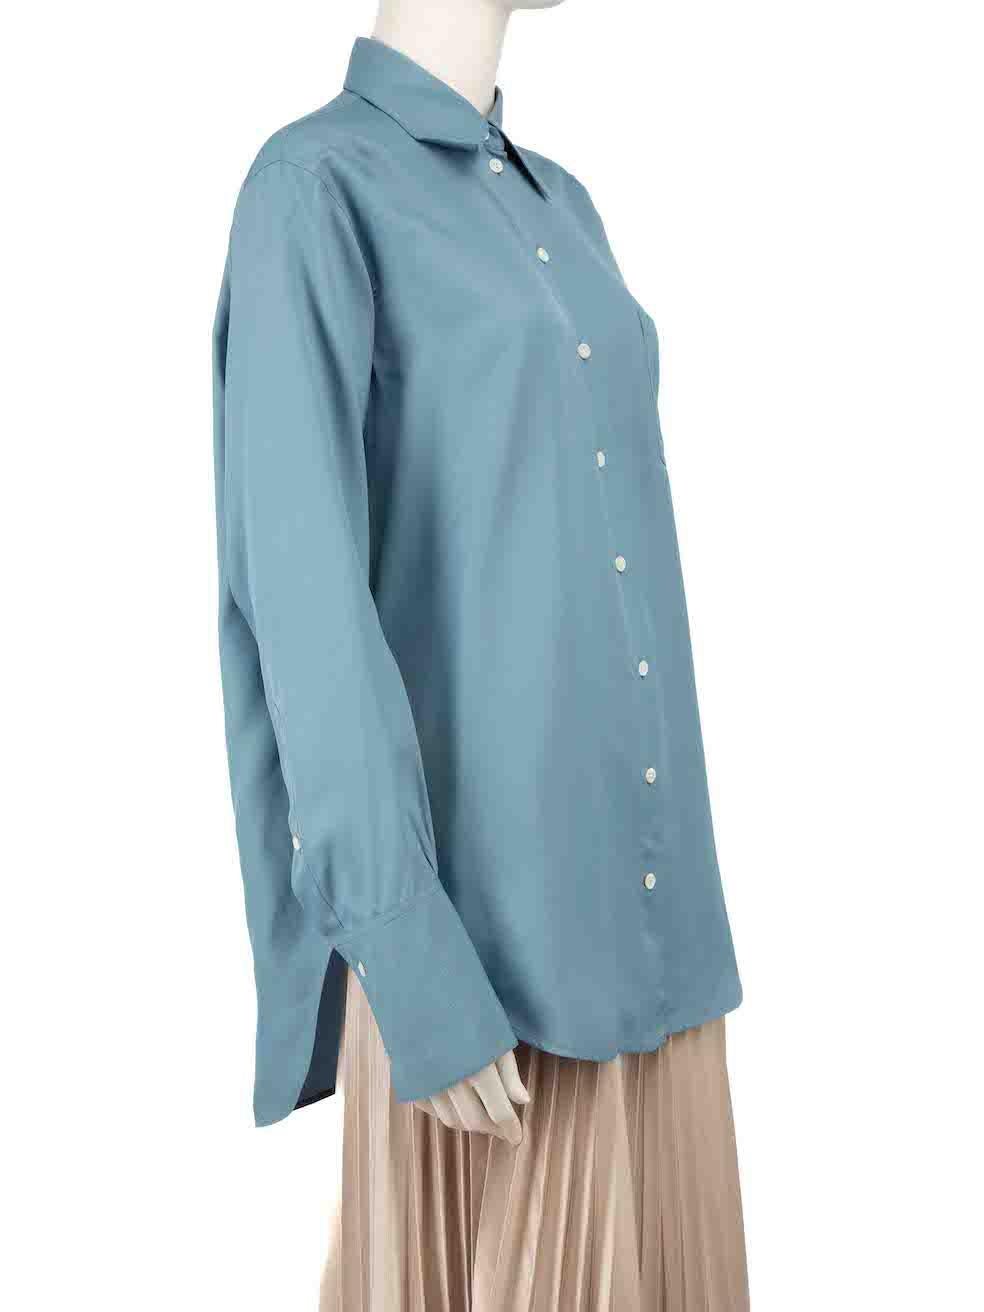 CONDITION is Very good. Minimal wear to shirt is evident. Minimal wear to the buttons at the front fastening and both cuffs with chips and cracks to the shell on this used Céline designer resale item.
 
 Details
 Blue
 Viscose
 Shirt
 Long sleeves
